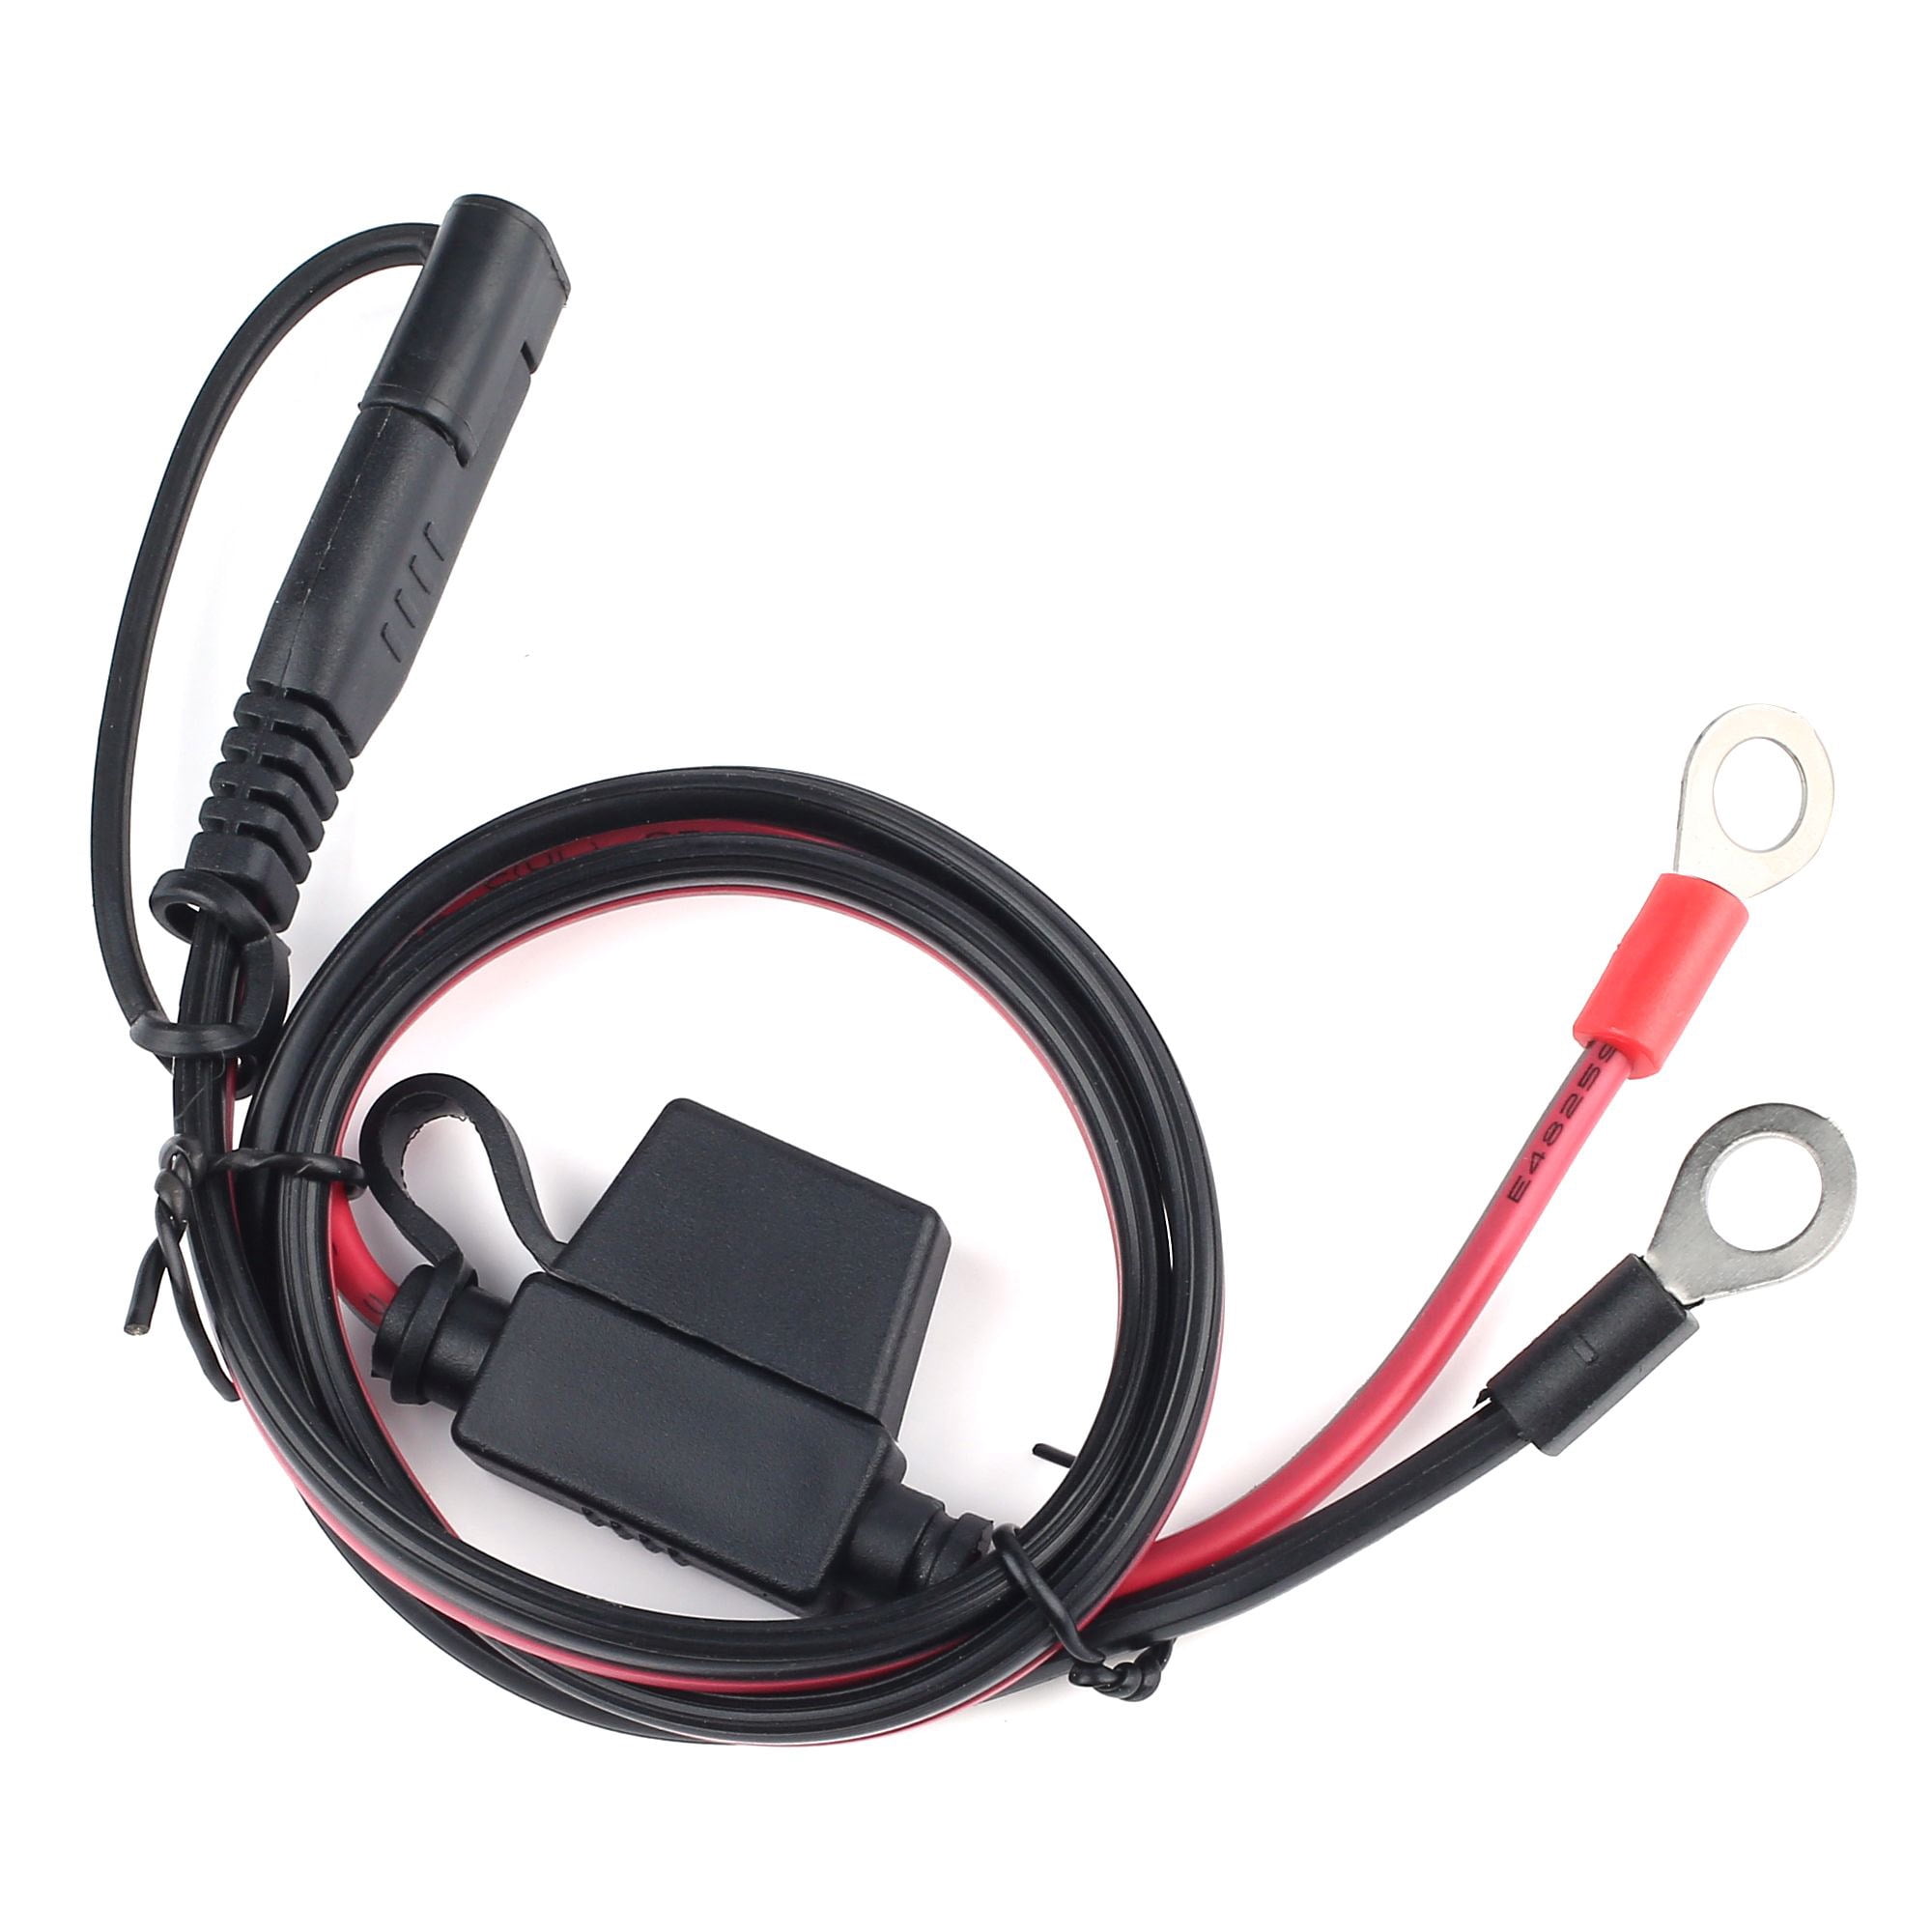 3 Pieces Ring Terminal Accessory Cables SAE to O Ring Terminal Harness 2 Pin Quick Disconnect Plug with 10A Safety Protection Fuse for Motorcycle Cars Tractor 